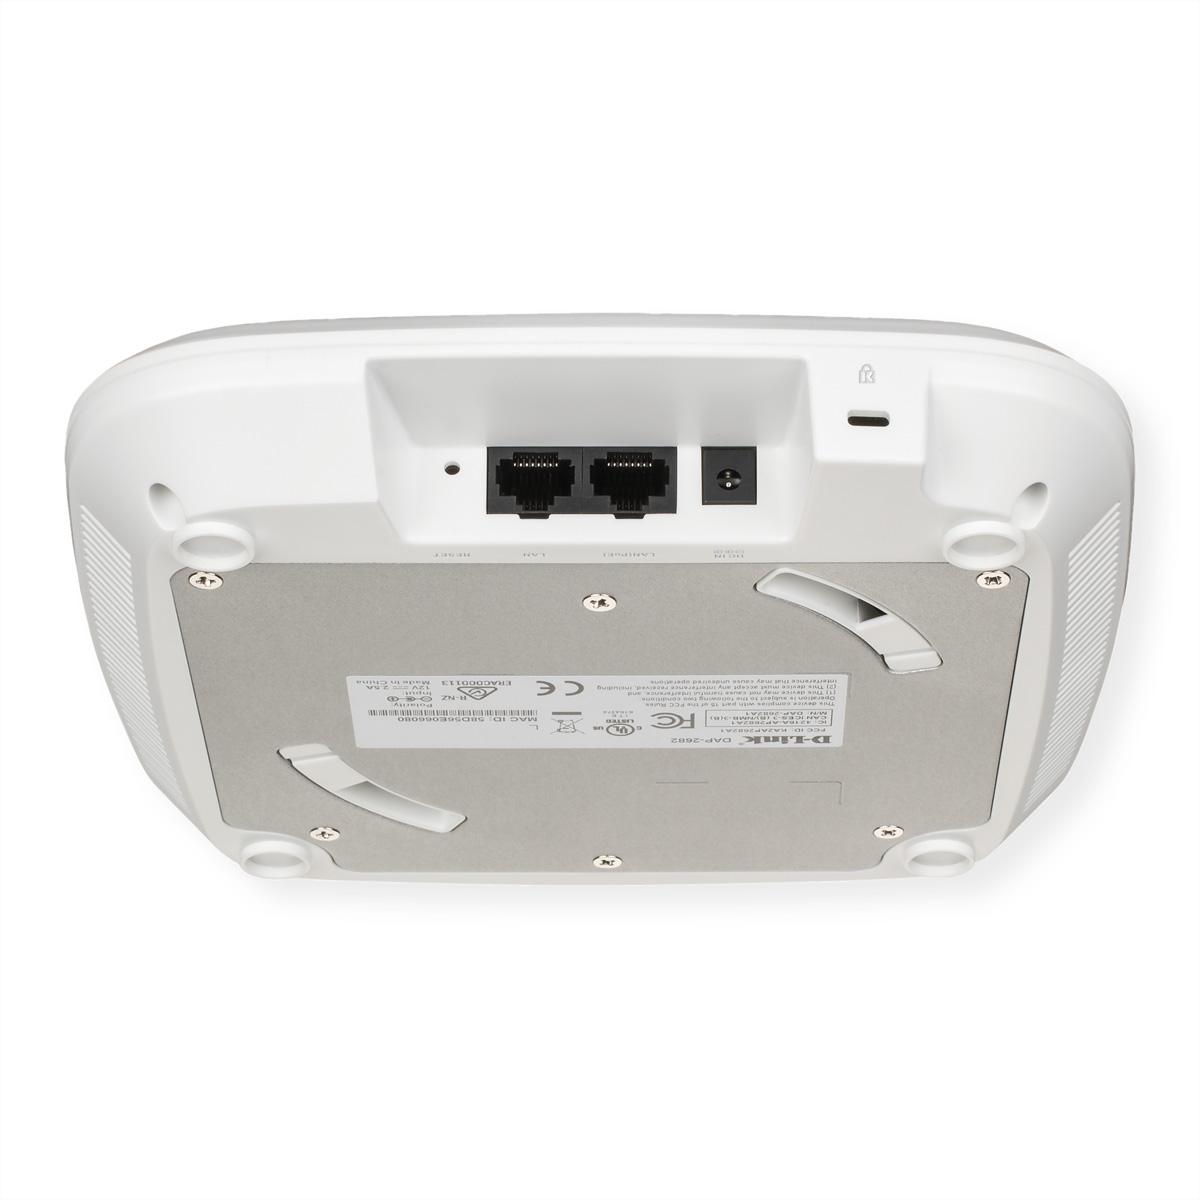 2 2,3 DAP-2682 Point AC2300 Wireless D-LINK Dual-Band Gbit/s Access Points PoE Access Wave